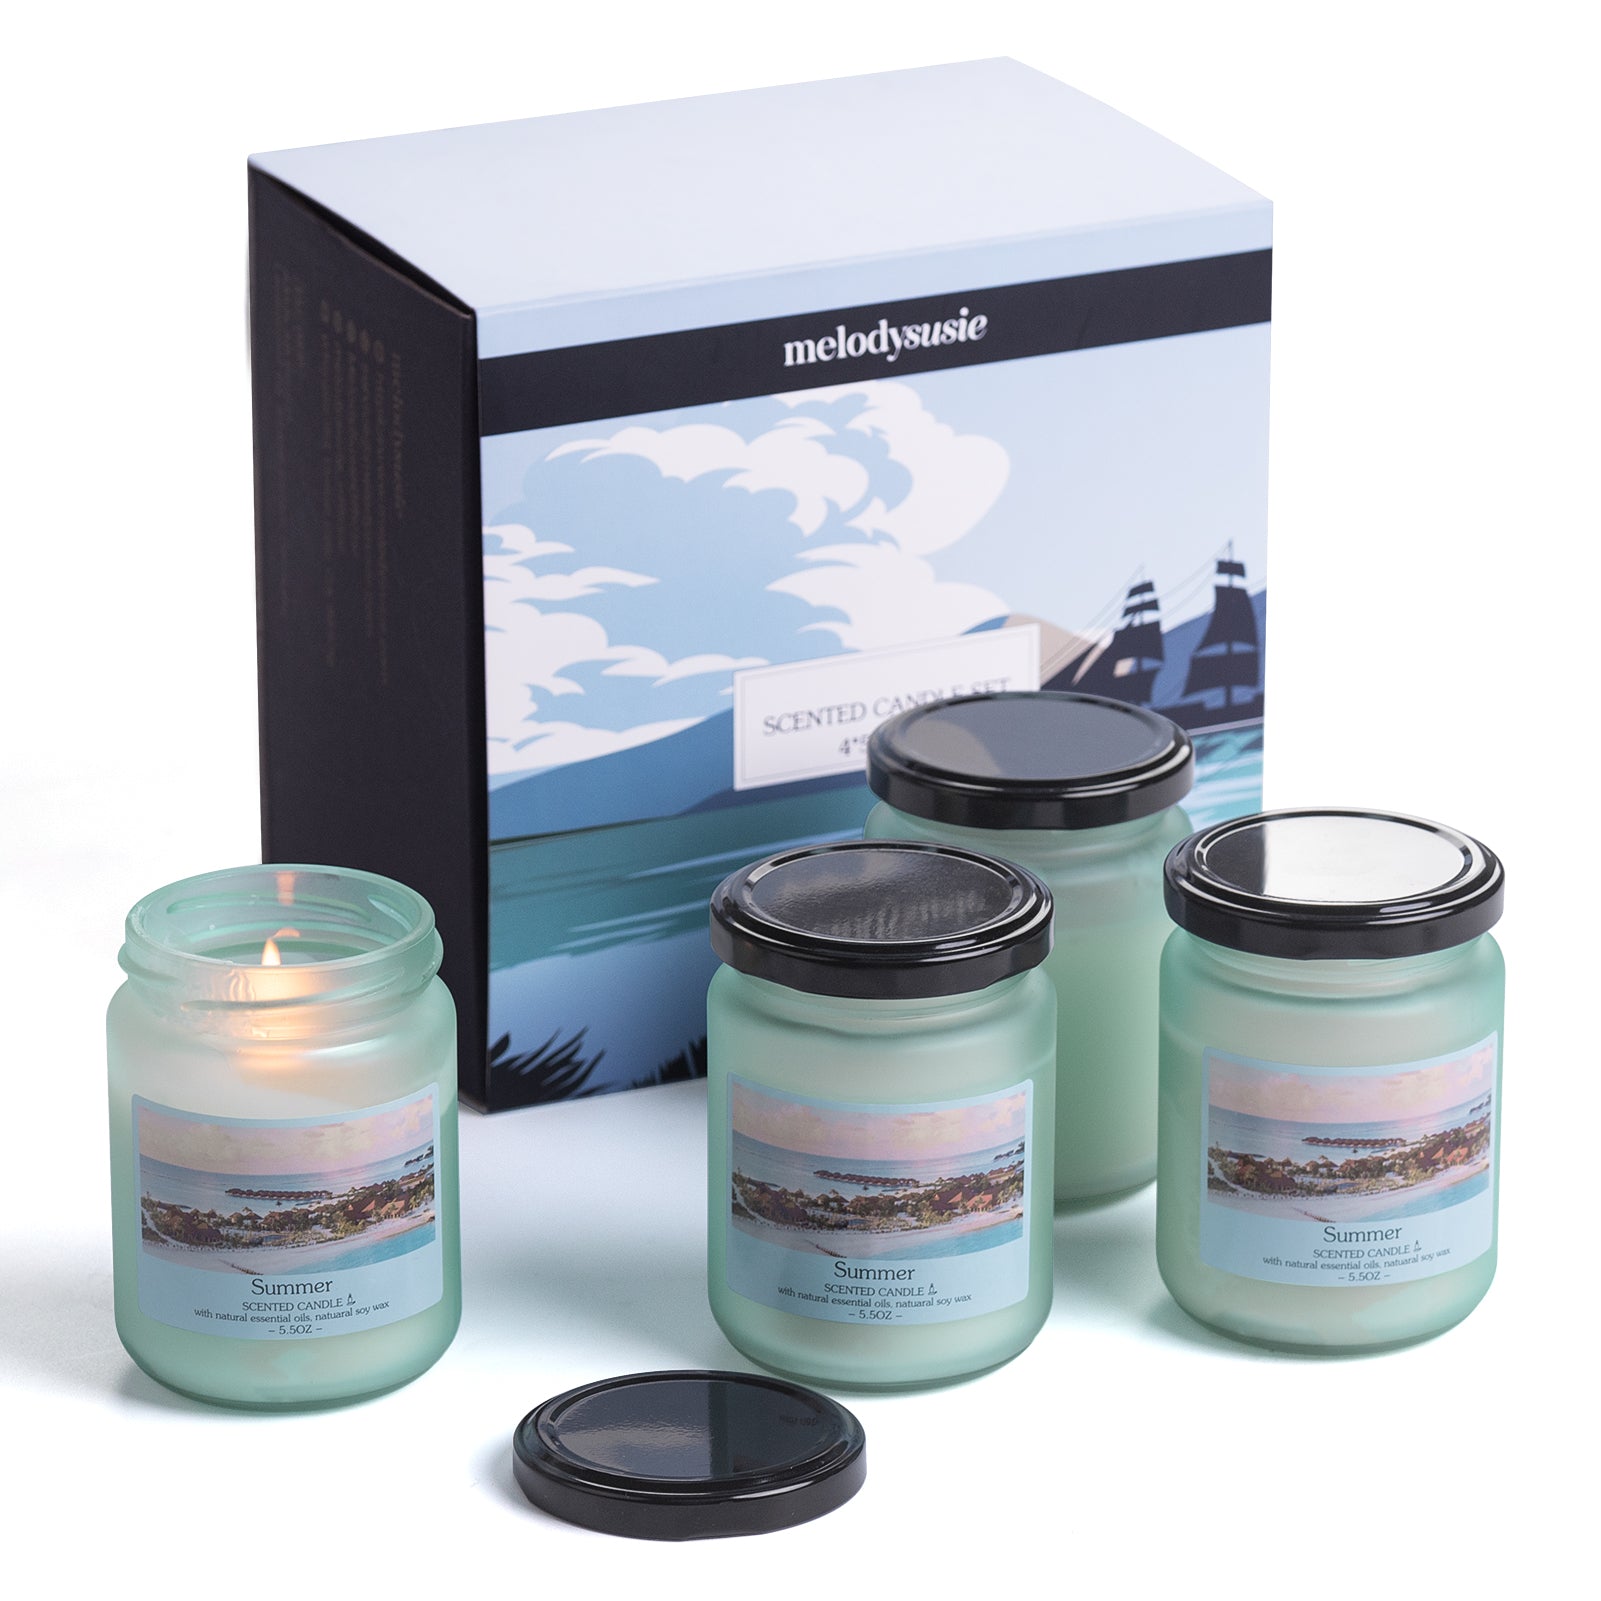 Seasonal Scented Candles Gift Set